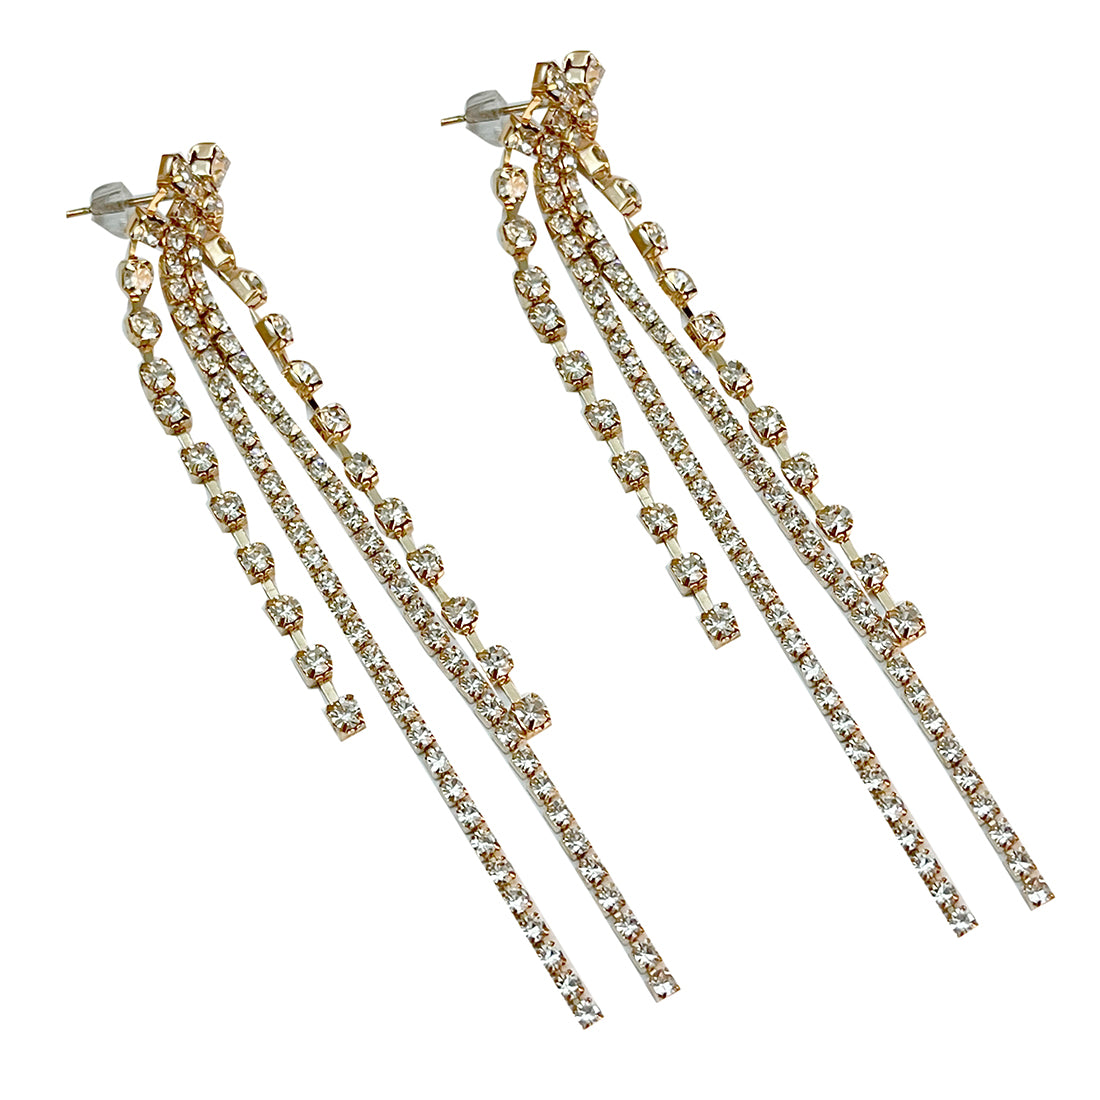 CONTEMPORARY WHITE DIAMANTE CRYSTAL STUDDED GOLD-TONED LONG TASSEL DROP EARRINGS